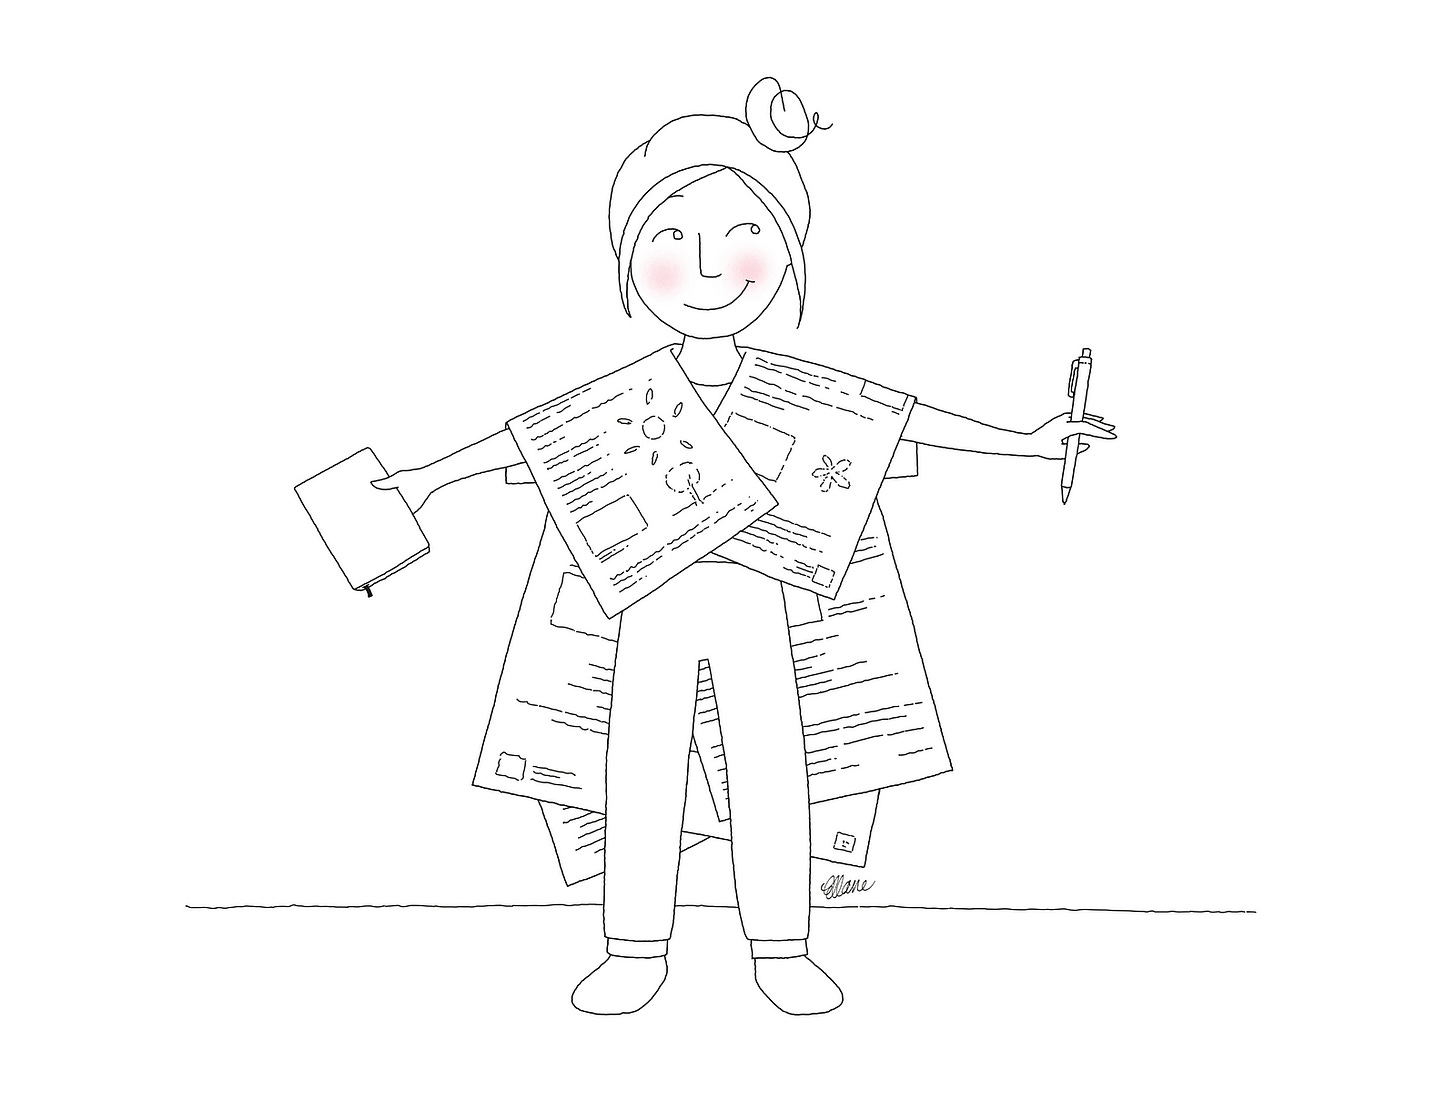 Cartoon line drawing of a smiling figure wearing a robe made from folded paper. They are holding a notebook in one outstretched hand, and a pen in the other.